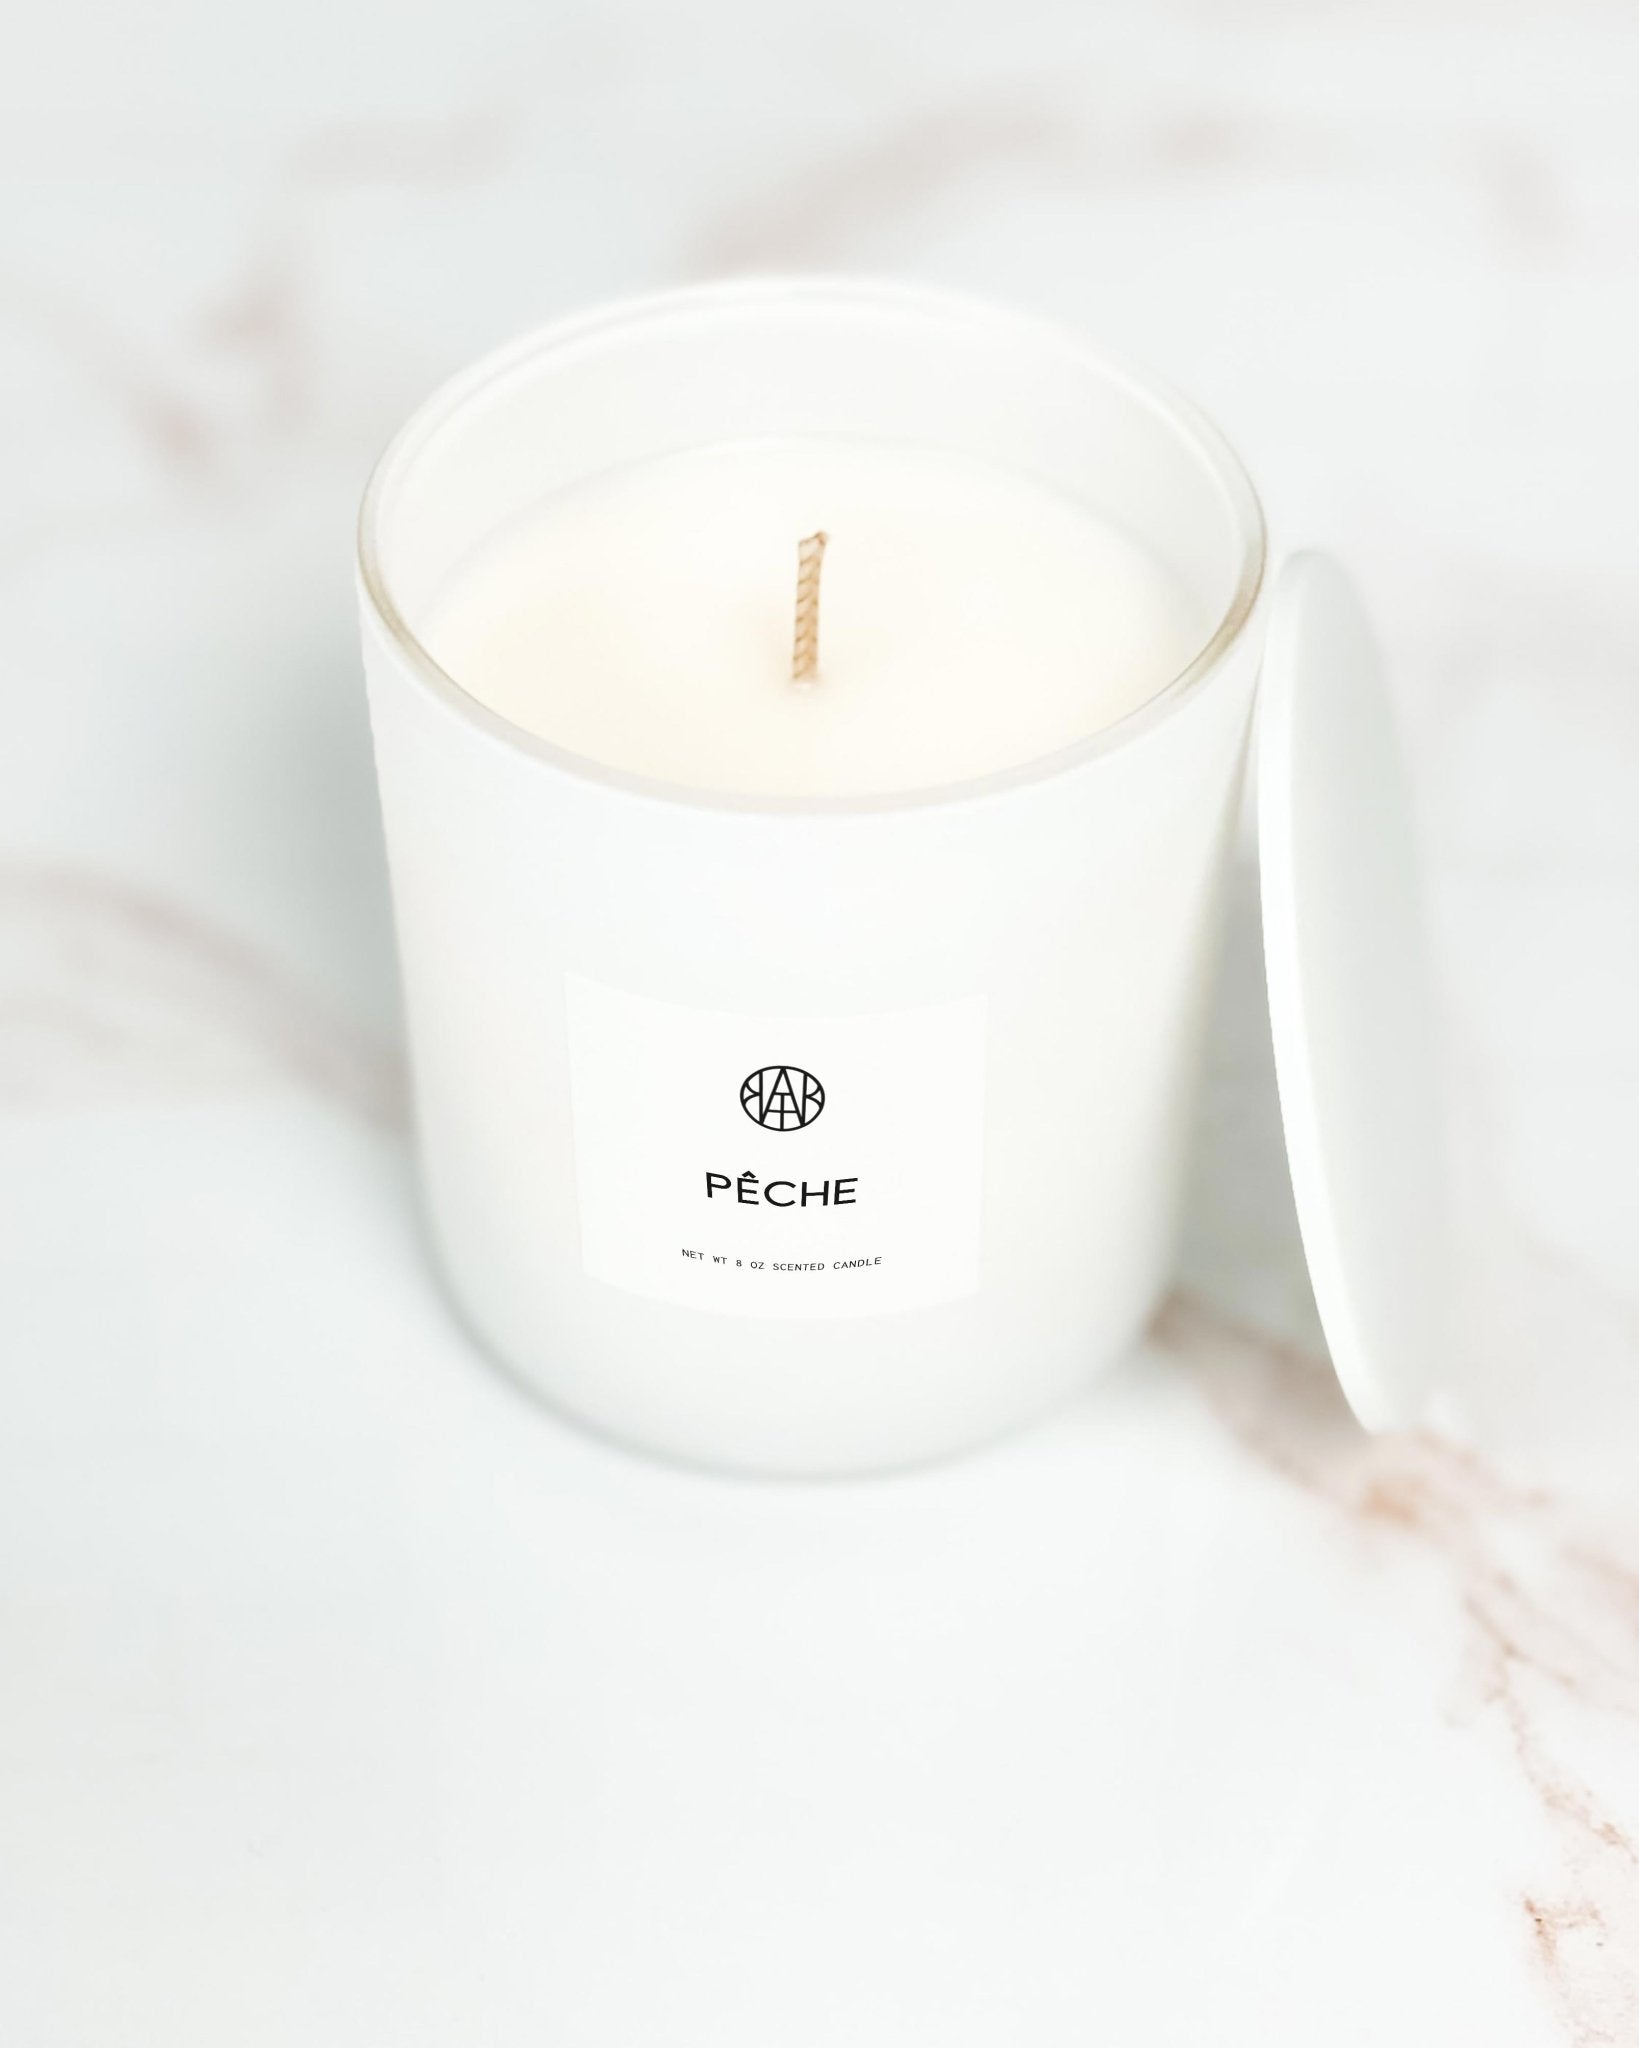 PECHE - Classic Candle - AEMBR - Clean Luxury Candles, Wax Melts & Laundry Care